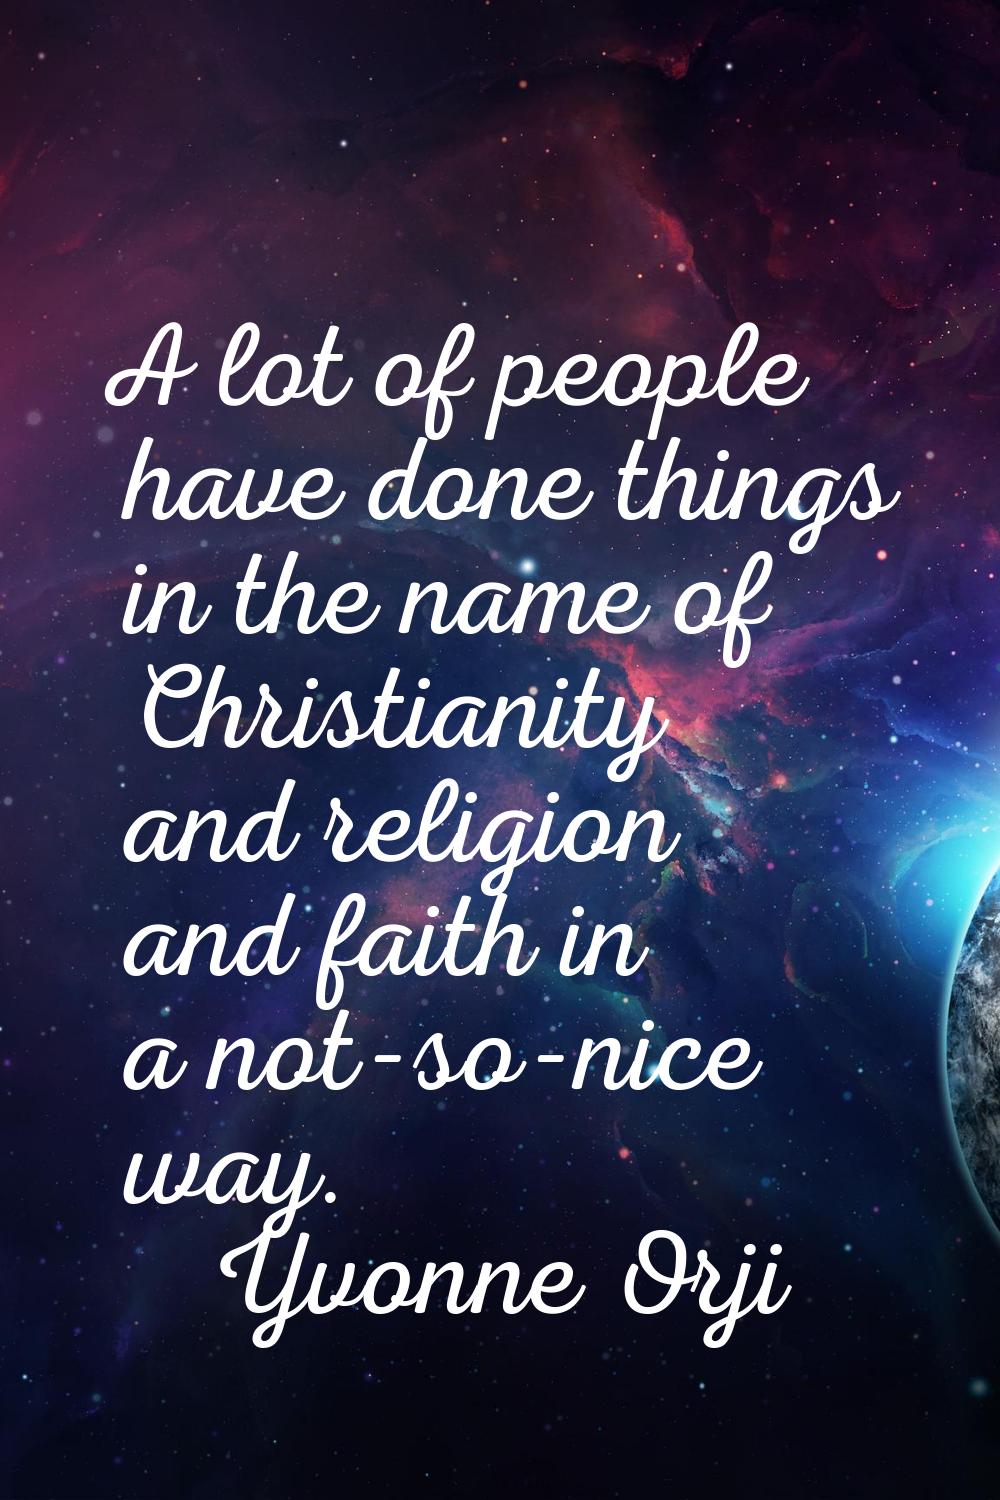 A lot of people have done things in the name of Christianity and religion and faith in a not-so-nic